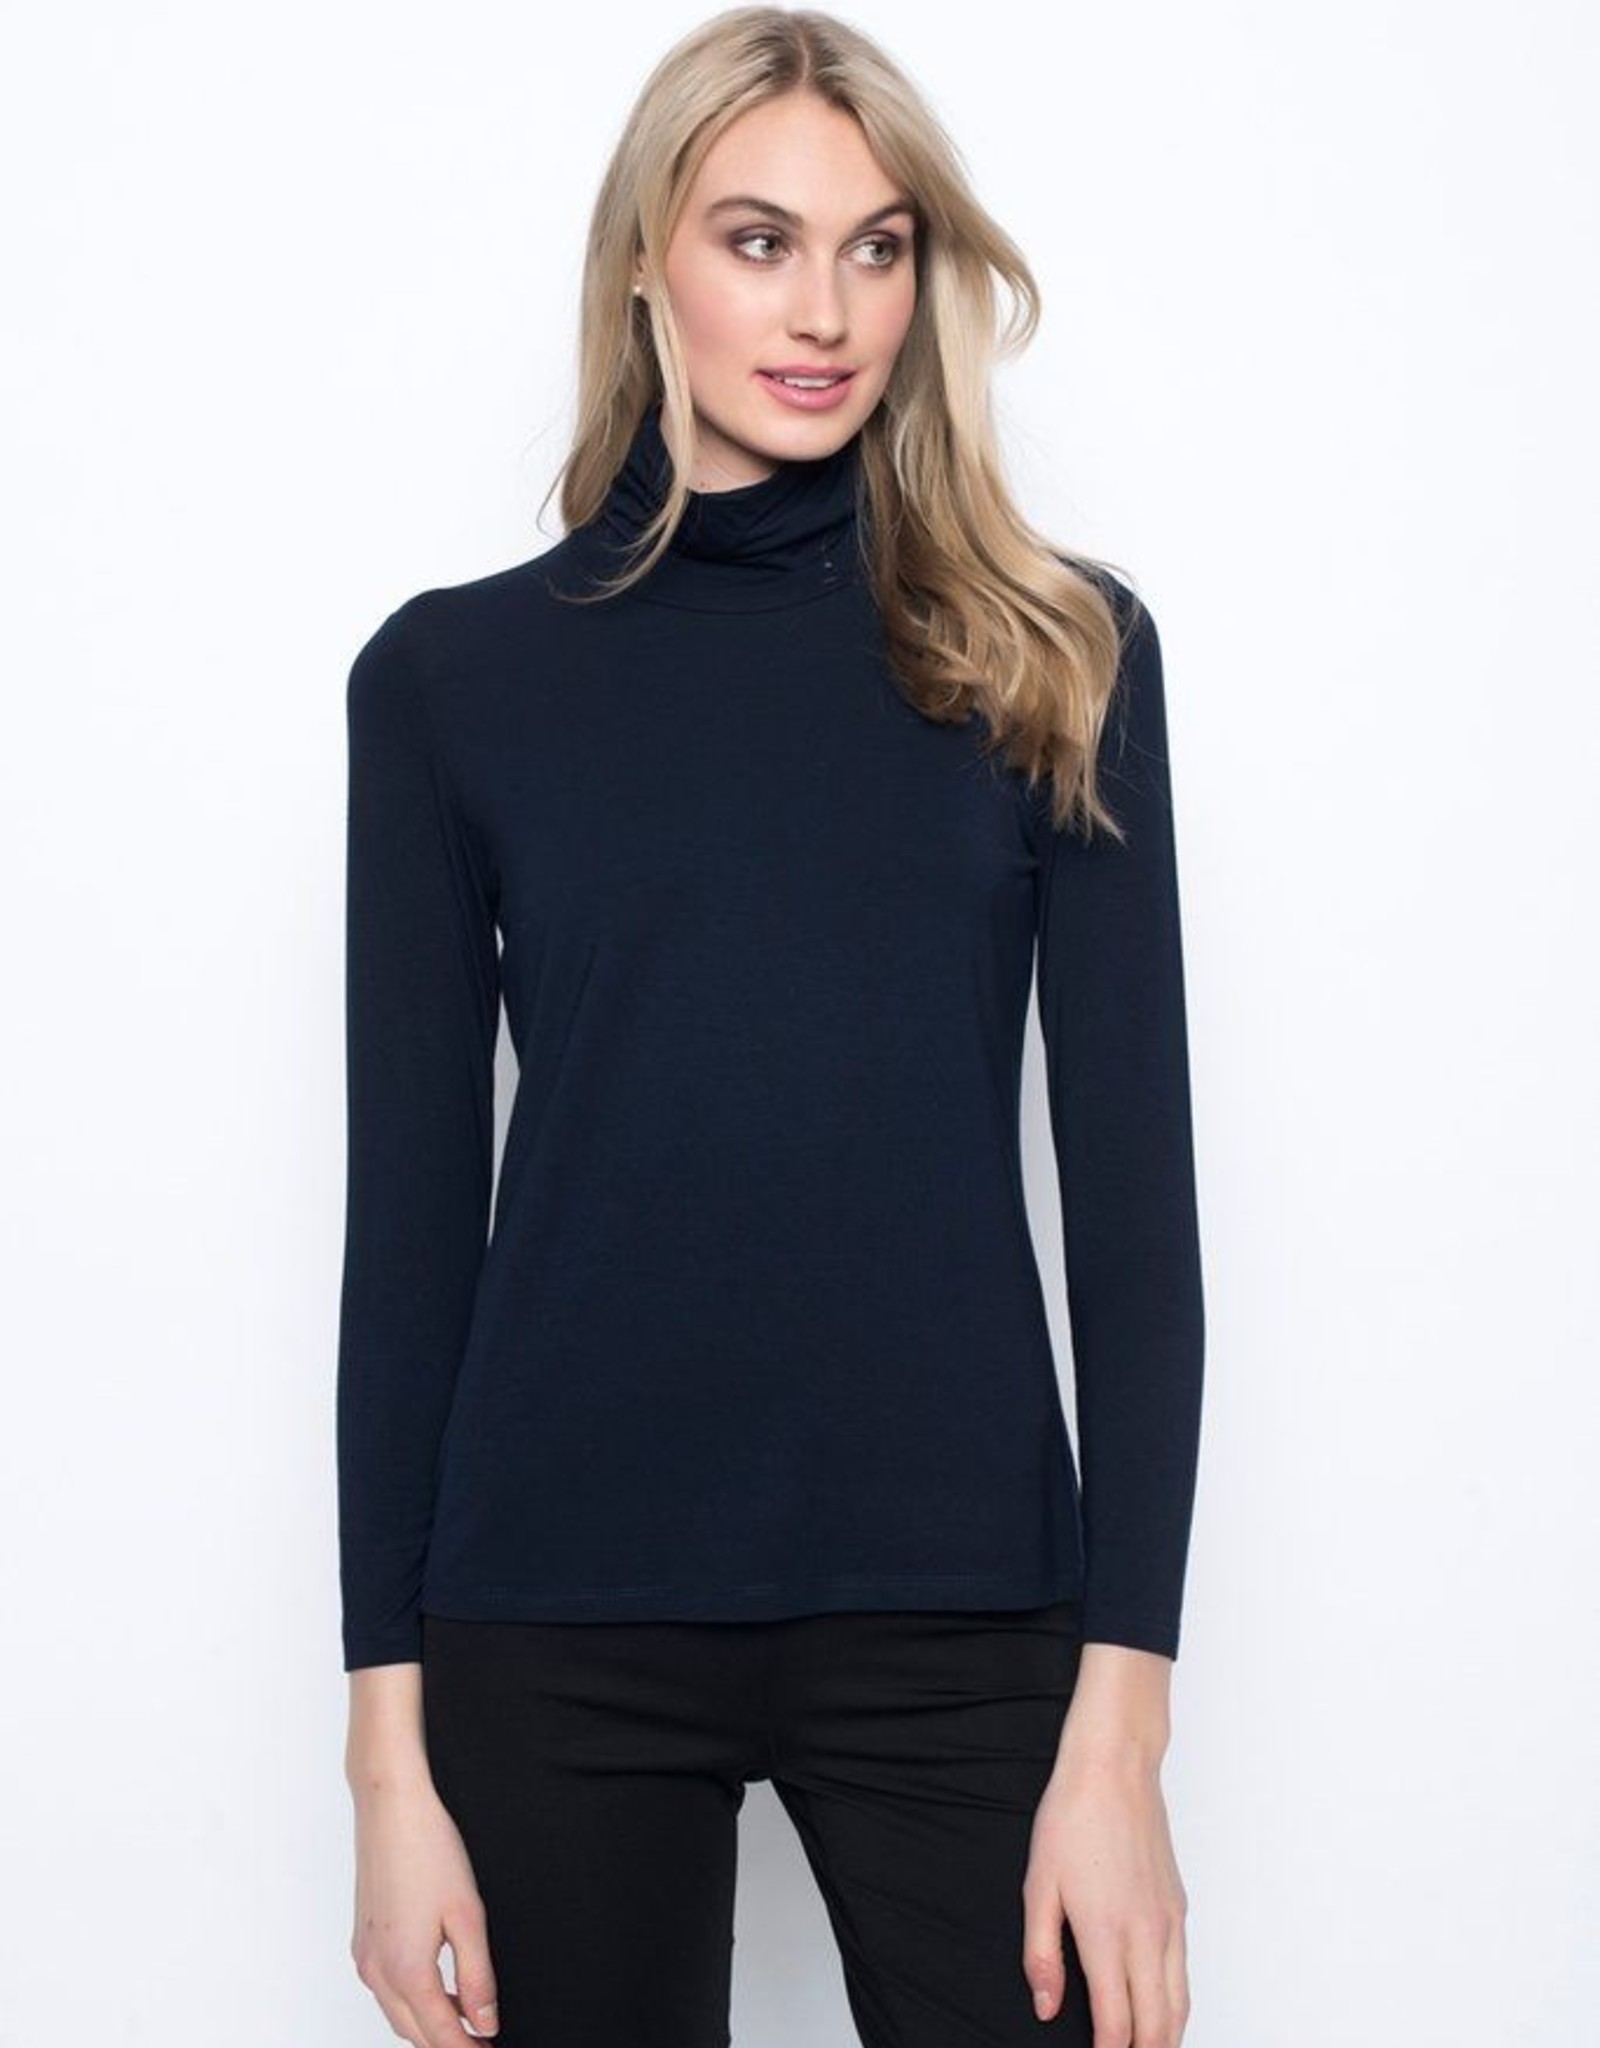 Picadilly Picadilly Long Sleeve Turtle Neck